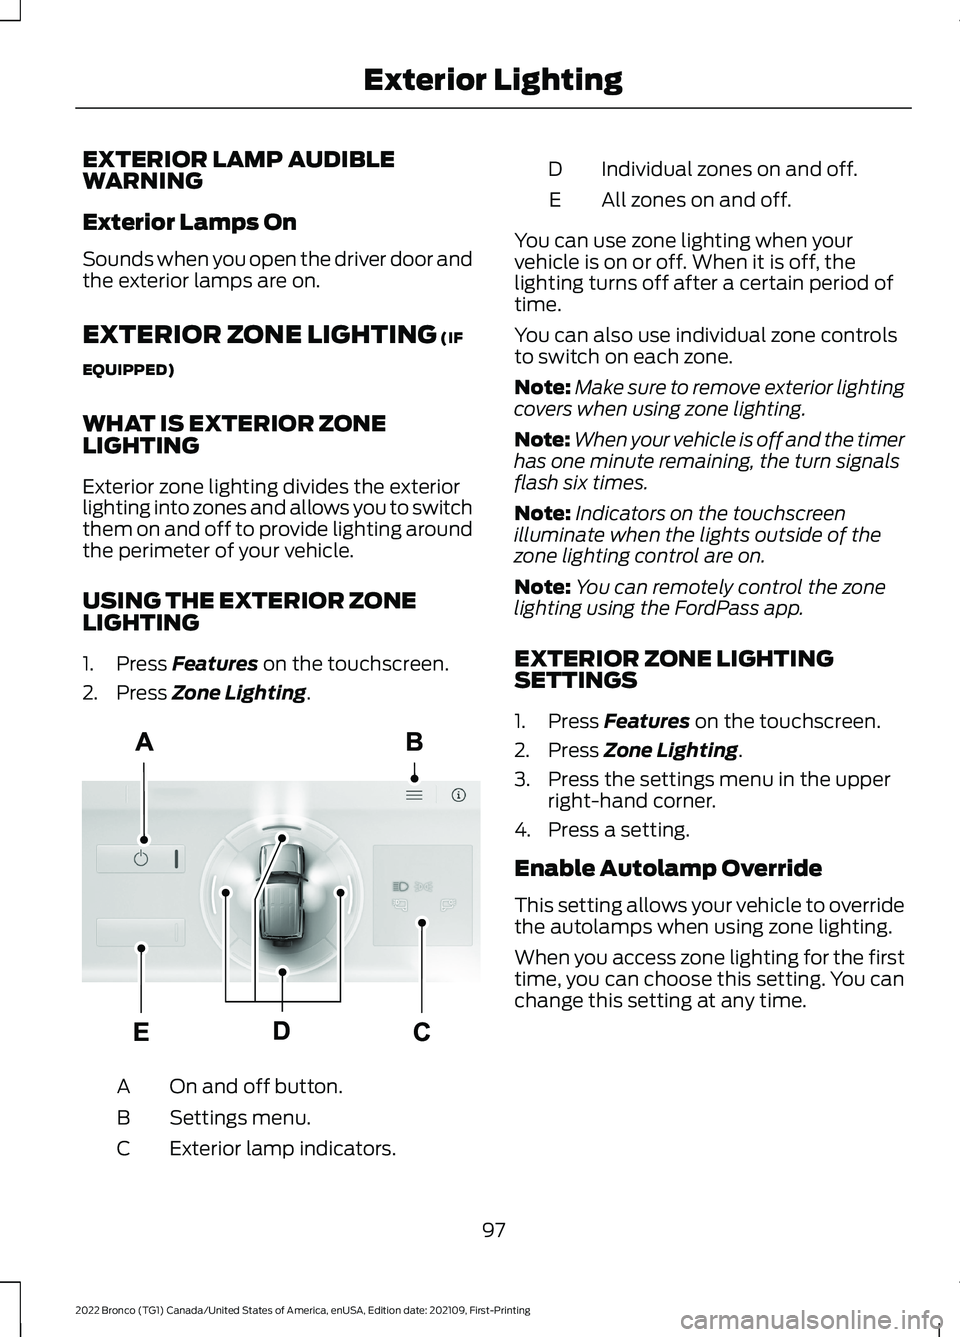 FORD BRONCO 2022 User Guide EXTERIOR LAMP AUDIBLEWARNING
Exterior Lamps On
Sounds when you open the driver door andthe exterior lamps are on.
EXTERIOR ZONE LIGHTING (IF
EQUIPPED)
WHAT IS EXTERIOR ZONELIGHTING
Exterior zone light